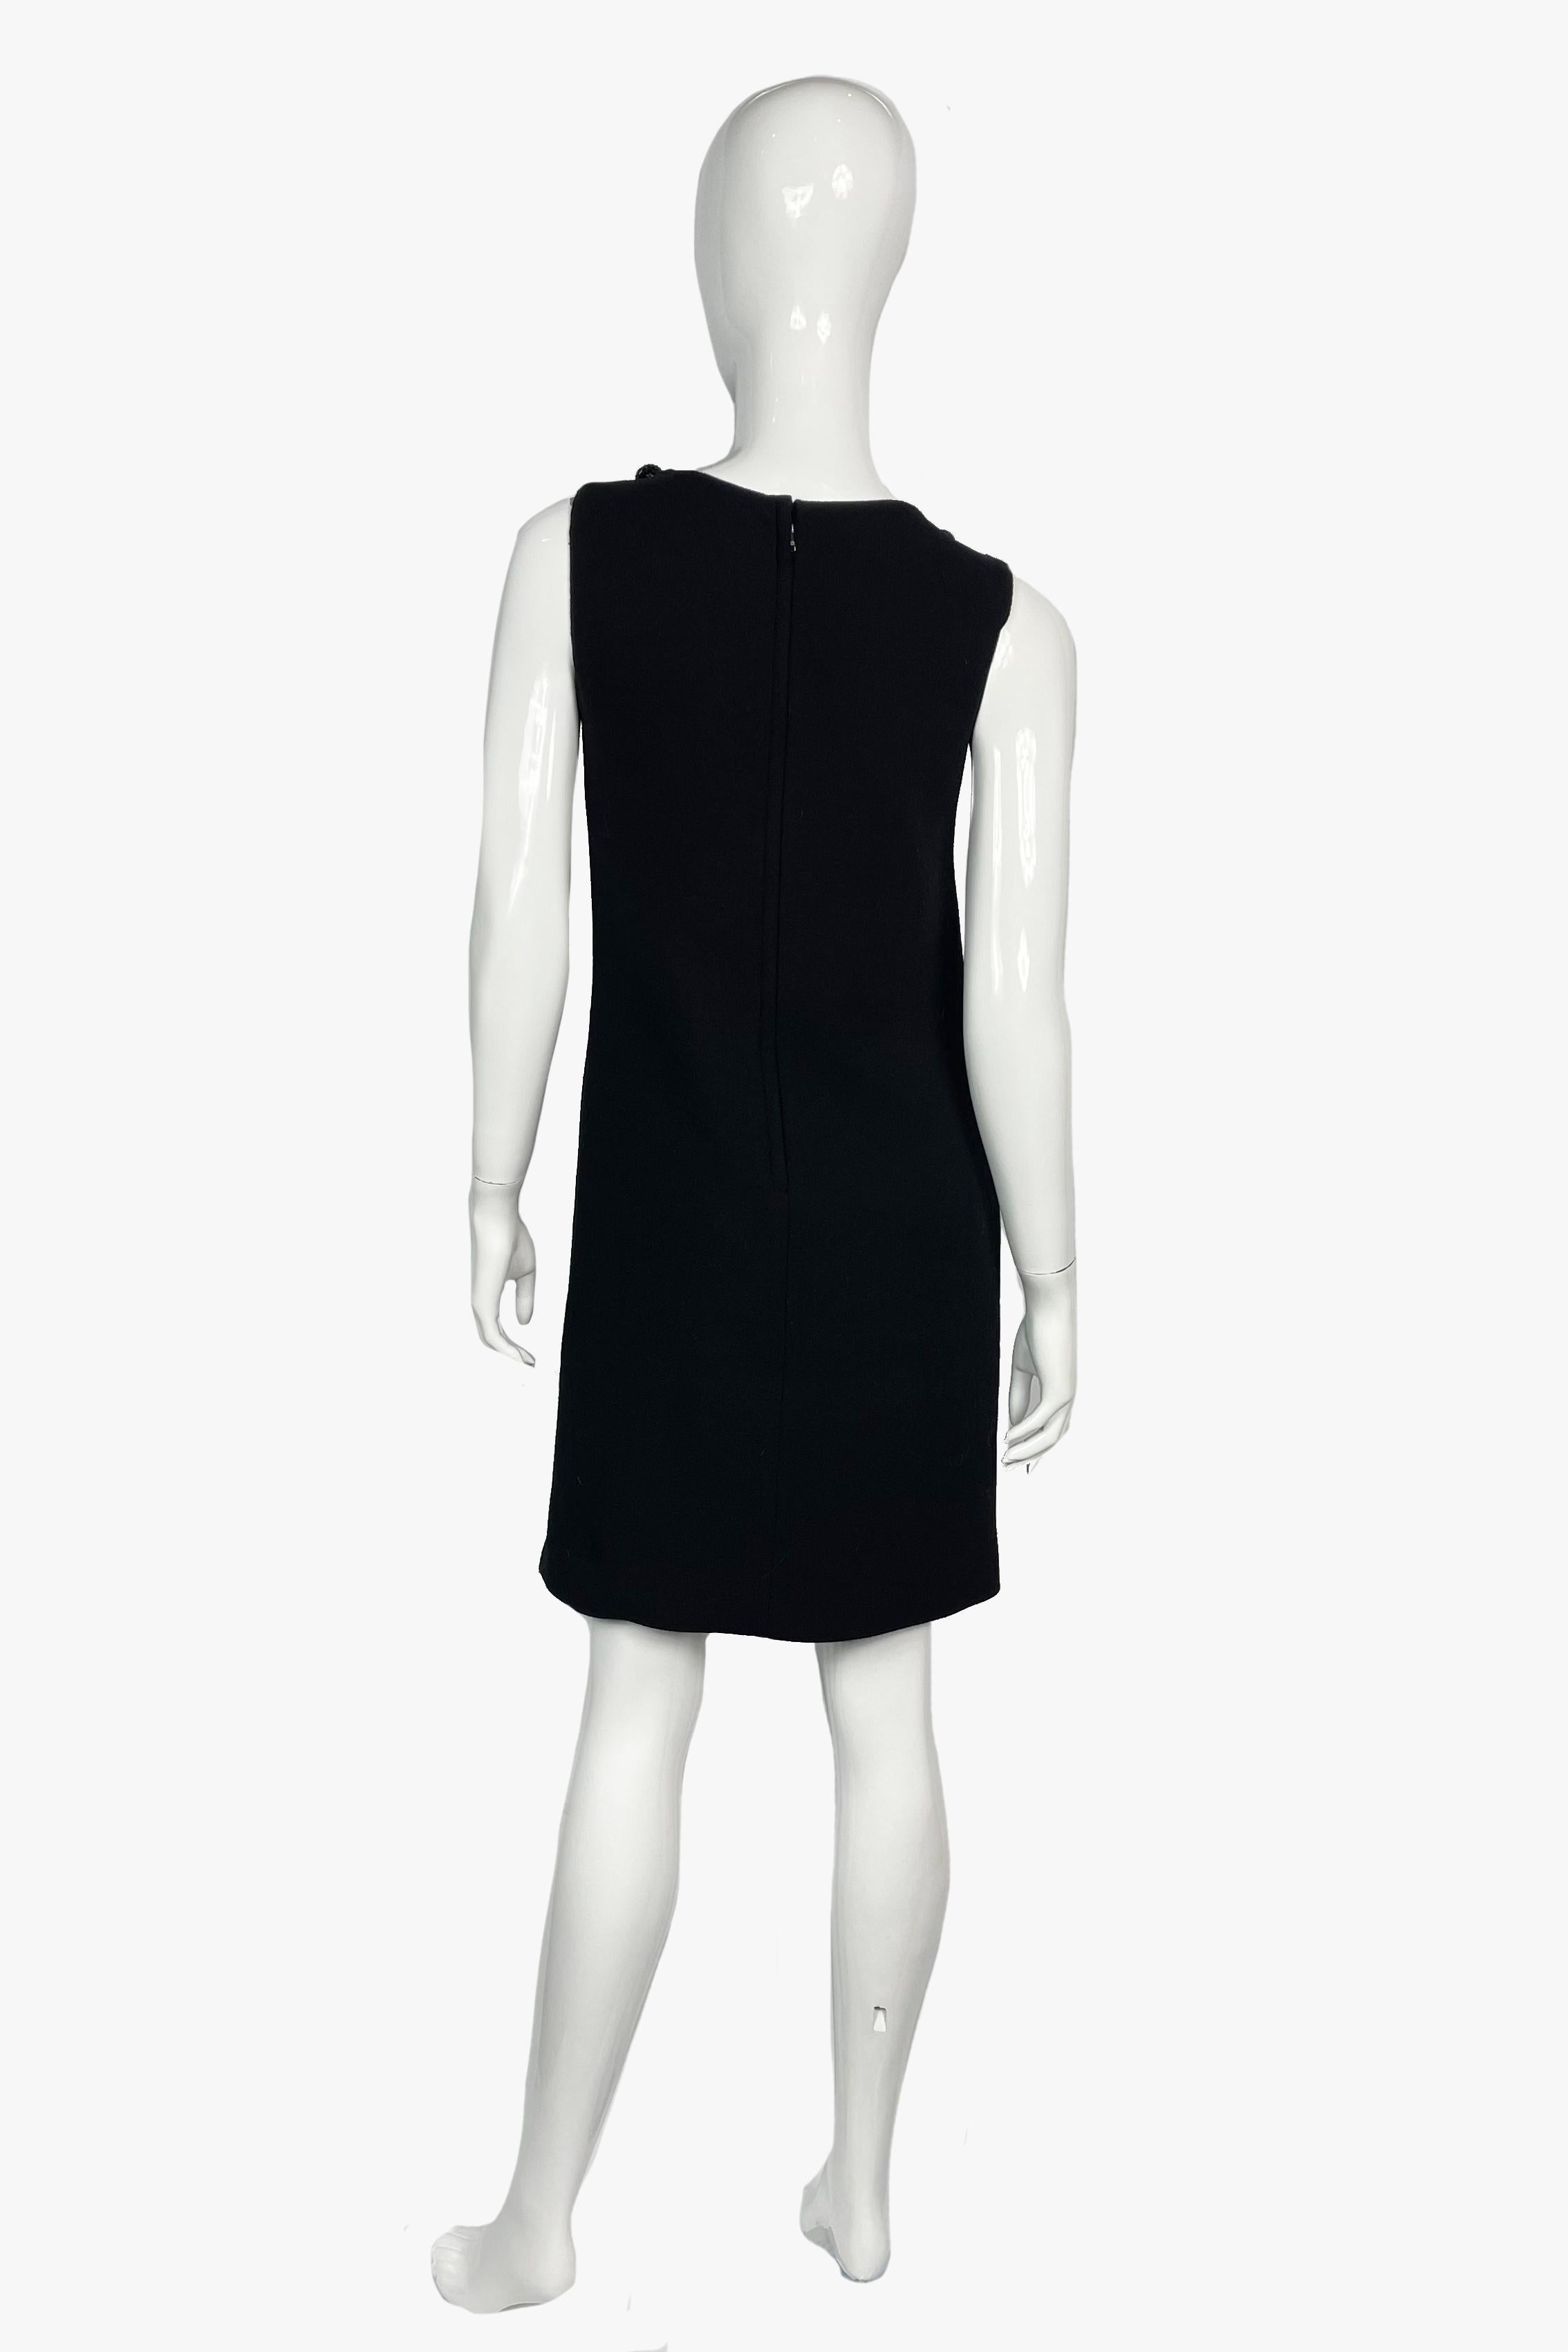 Dolce&Gabbana black wool mini dress with medallions necklace, 2010s In Excellent Condition For Sale In New York, NY